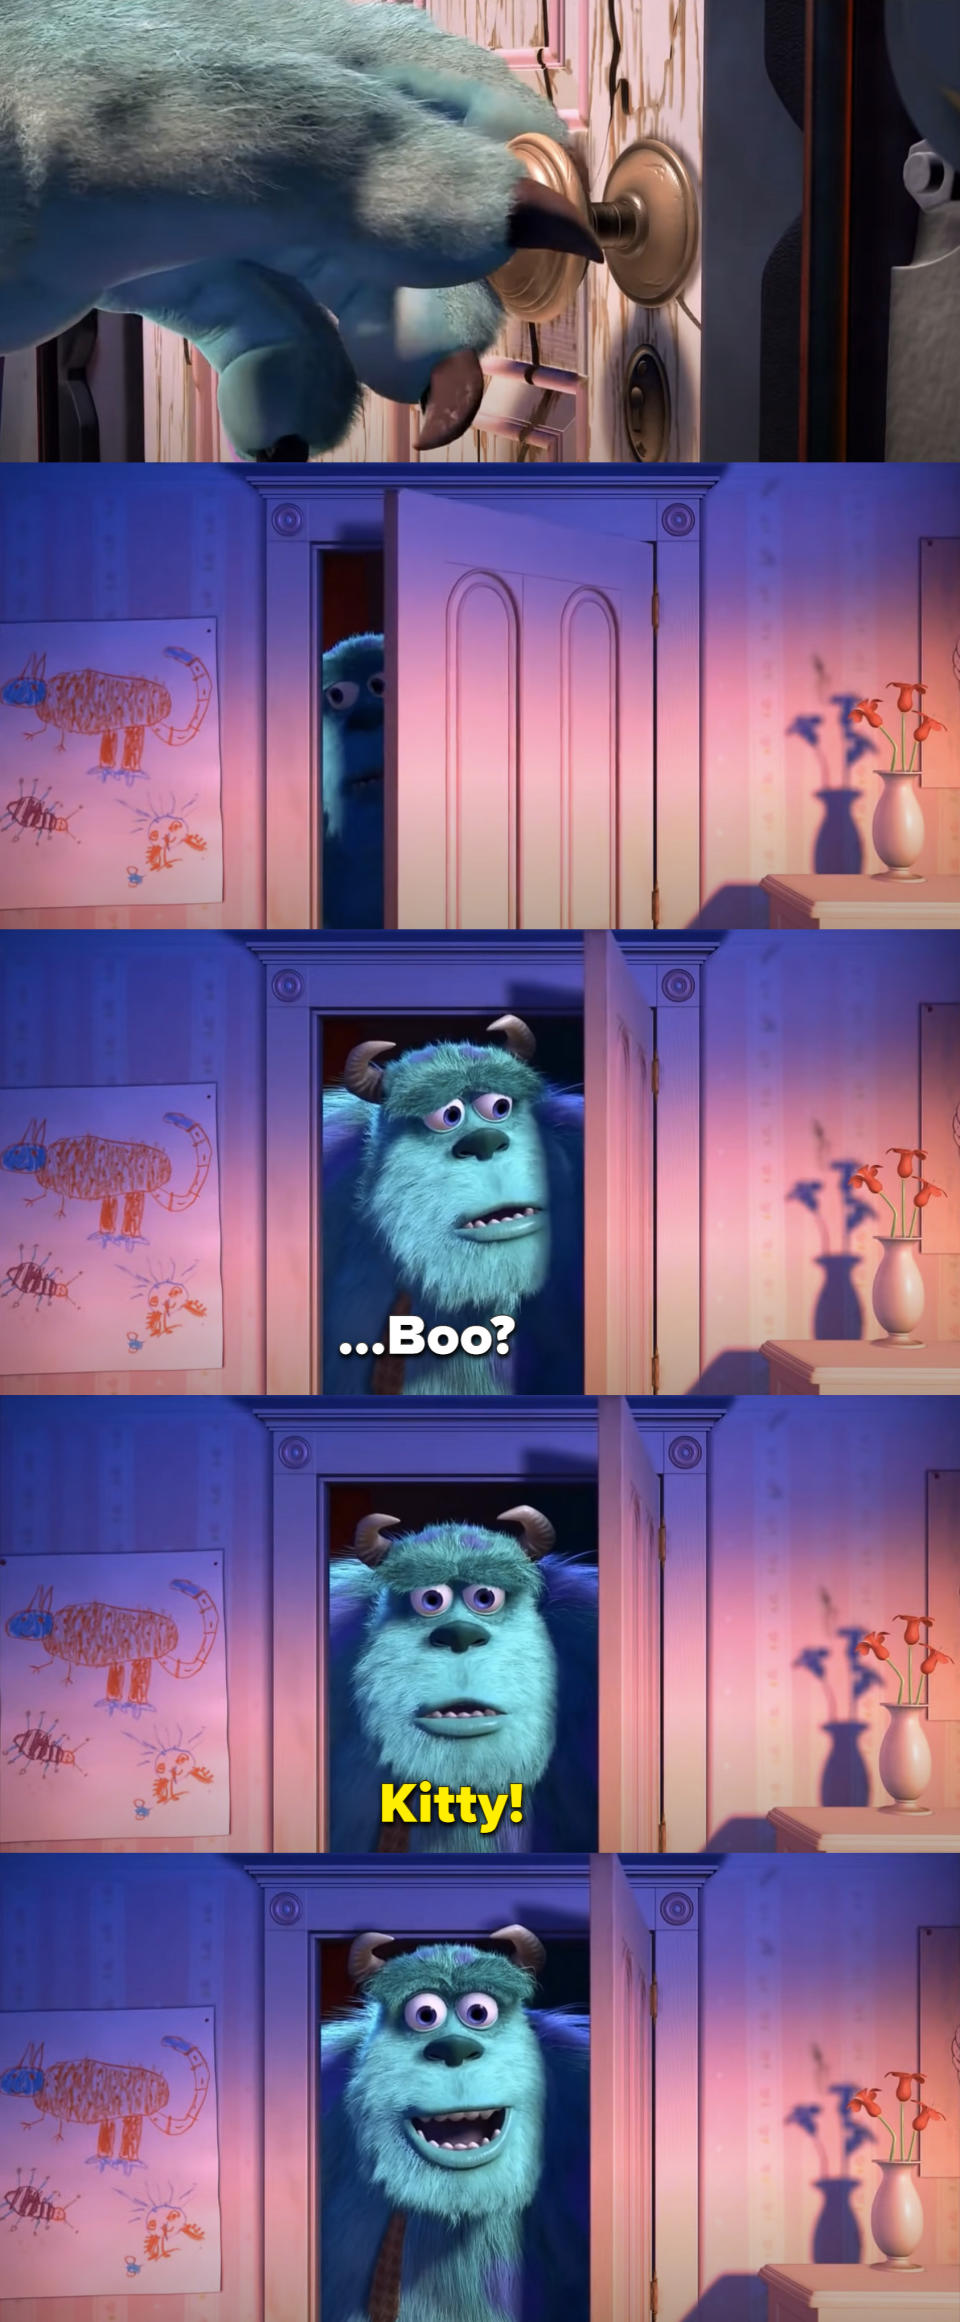 Sulley peering through the door and his face lighting up when he hears Boo say "Kitty"